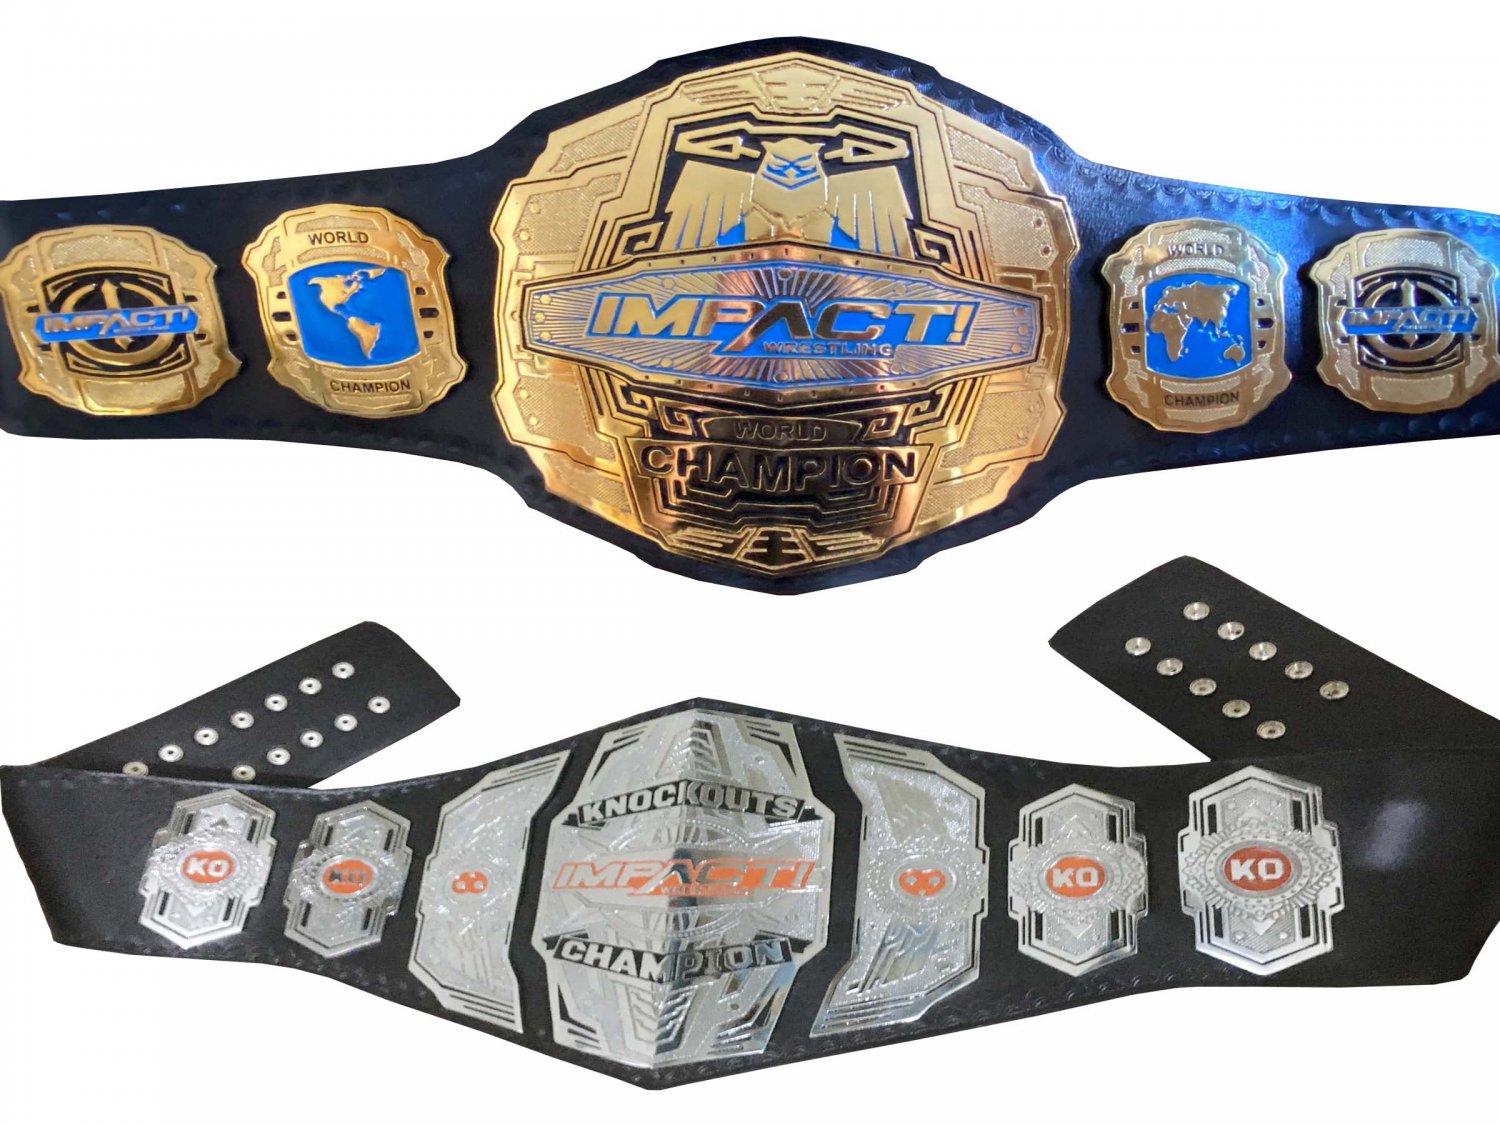 IMPACT WORLD CHAMPION AND KNOCKOUT WRESTLING CHAMPIONSHIP 2 BELT DEAL